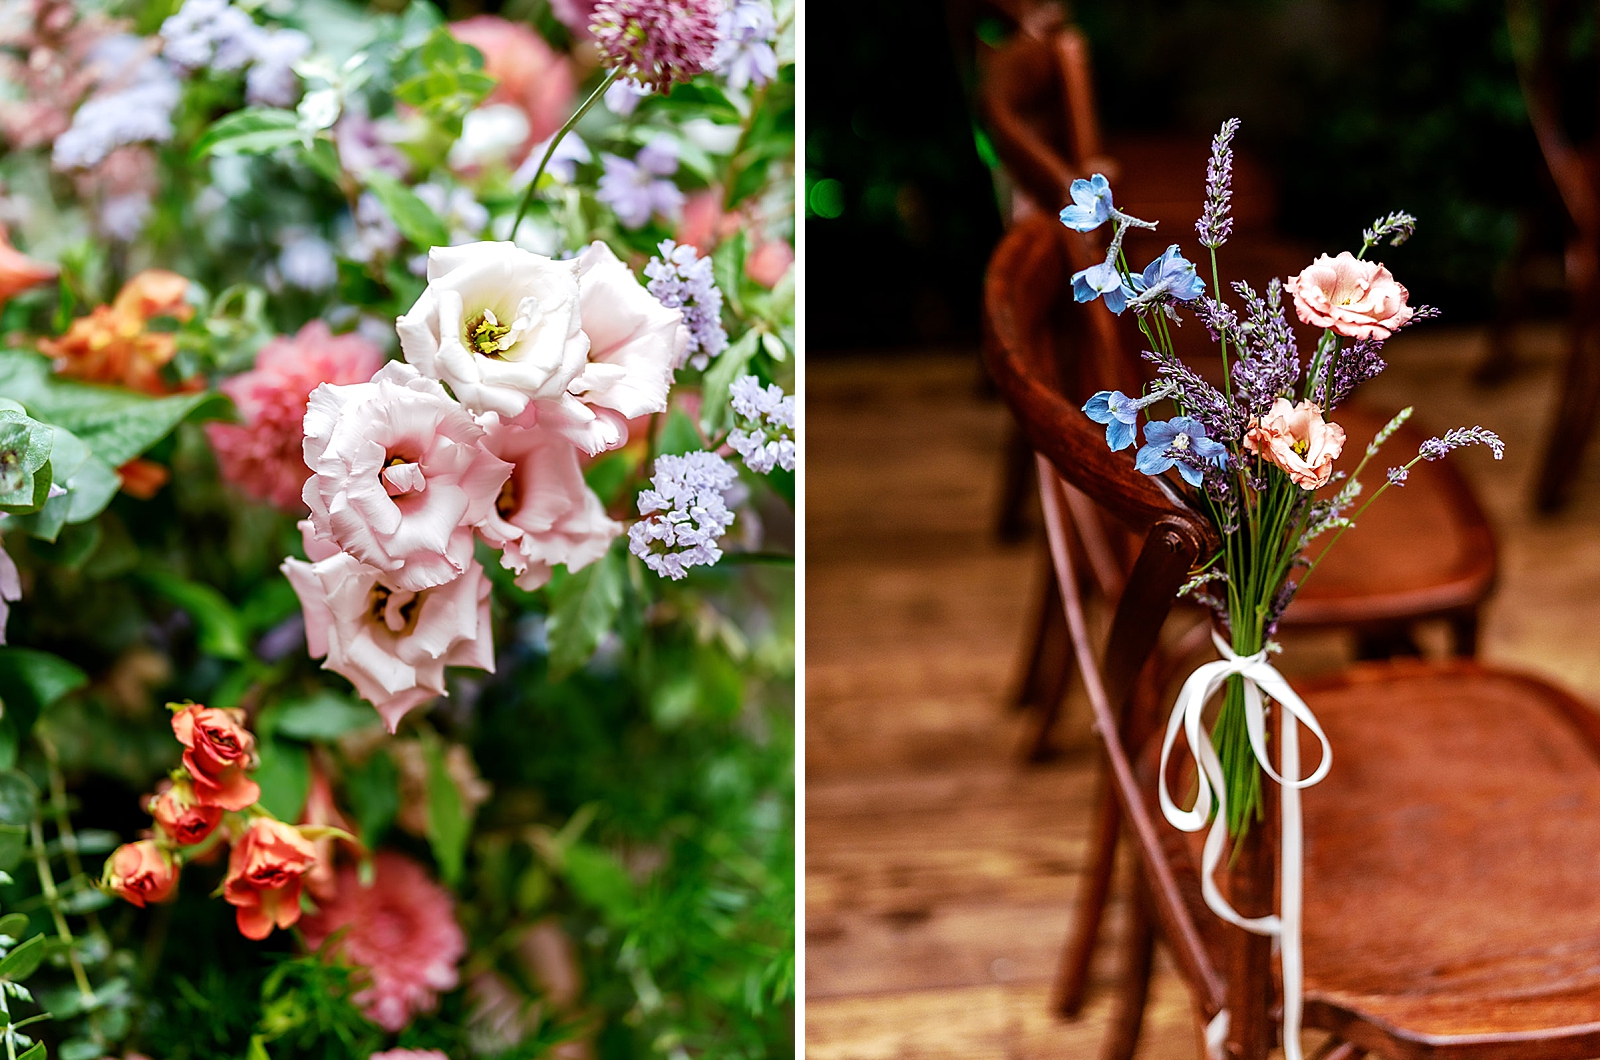 Left photo: Up close shot of the florals included in the altar arch. 
Right photo: Up close shot of the flowers fixed to the aisle chairs.